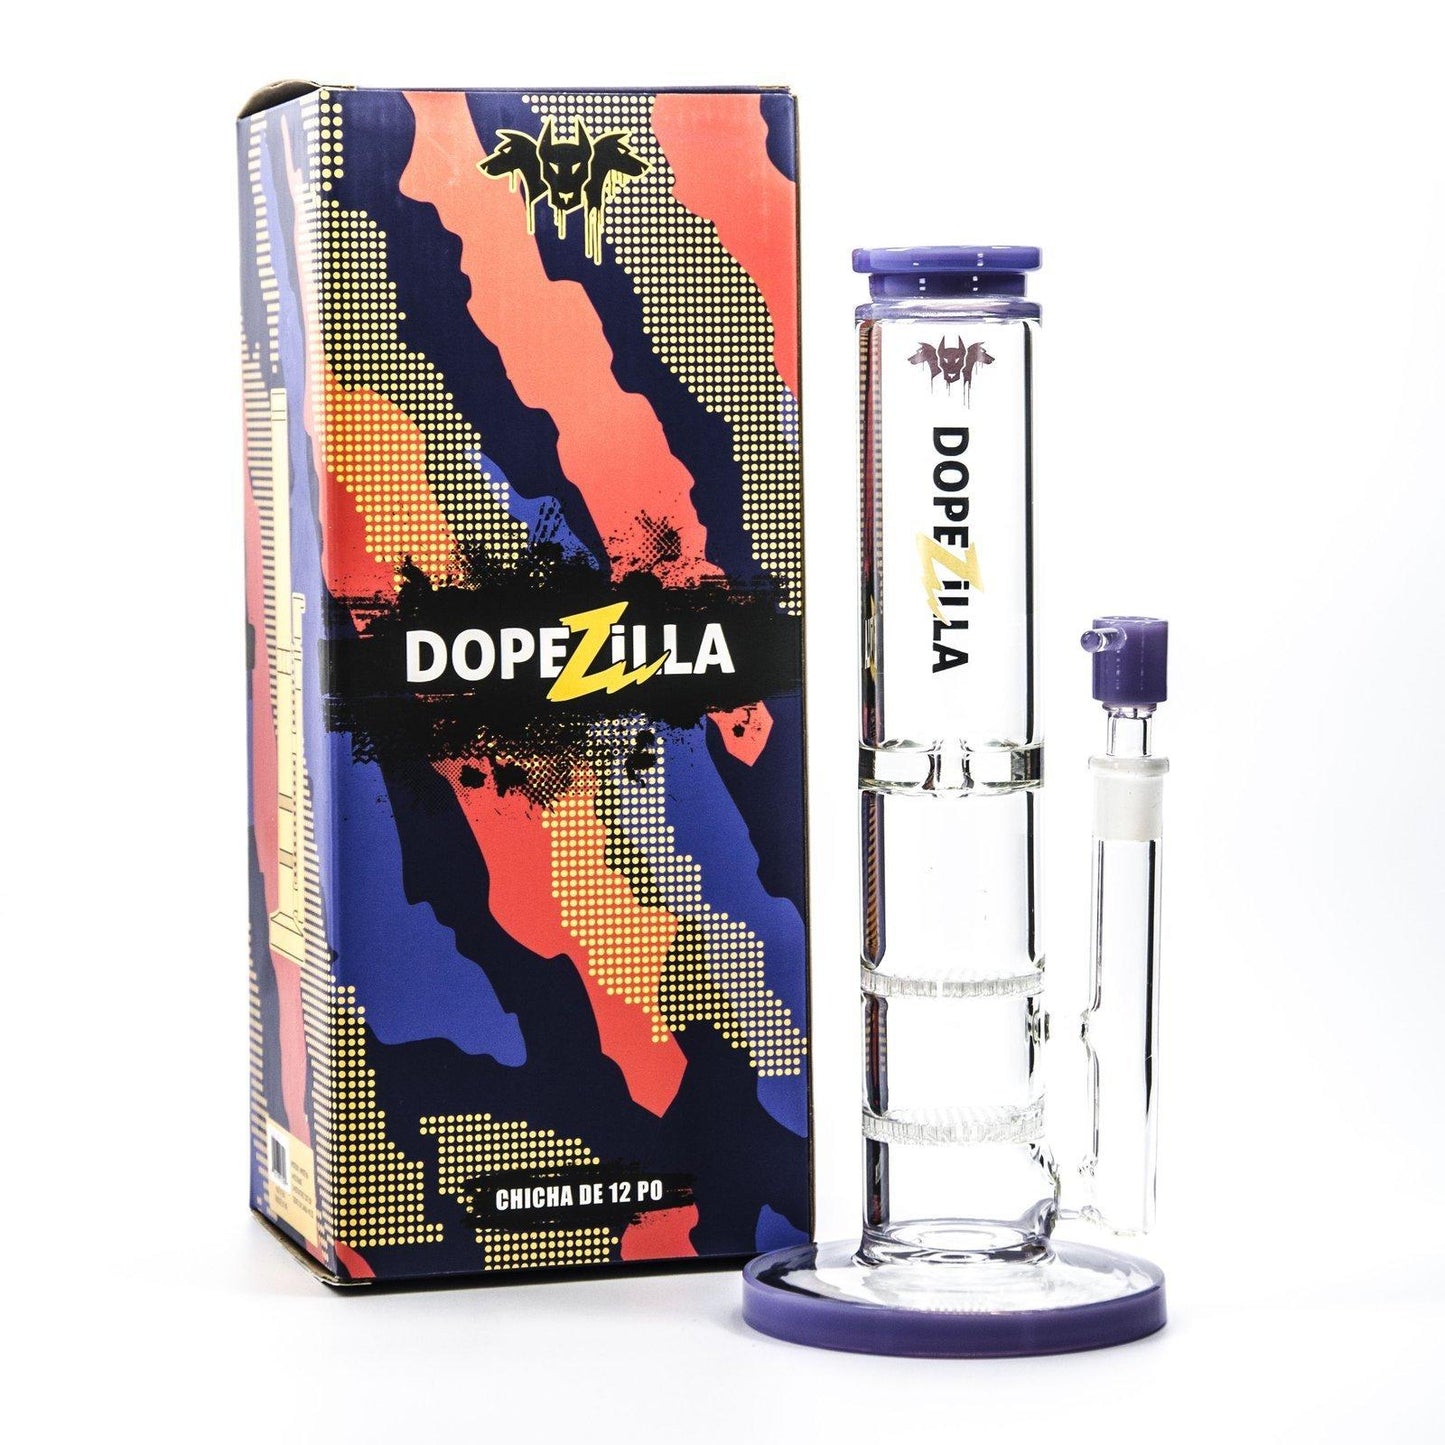 Dopezilla-Cerberus-Water Pipe-12 Inch-Various Colors-1 Count Flower Power Packages 